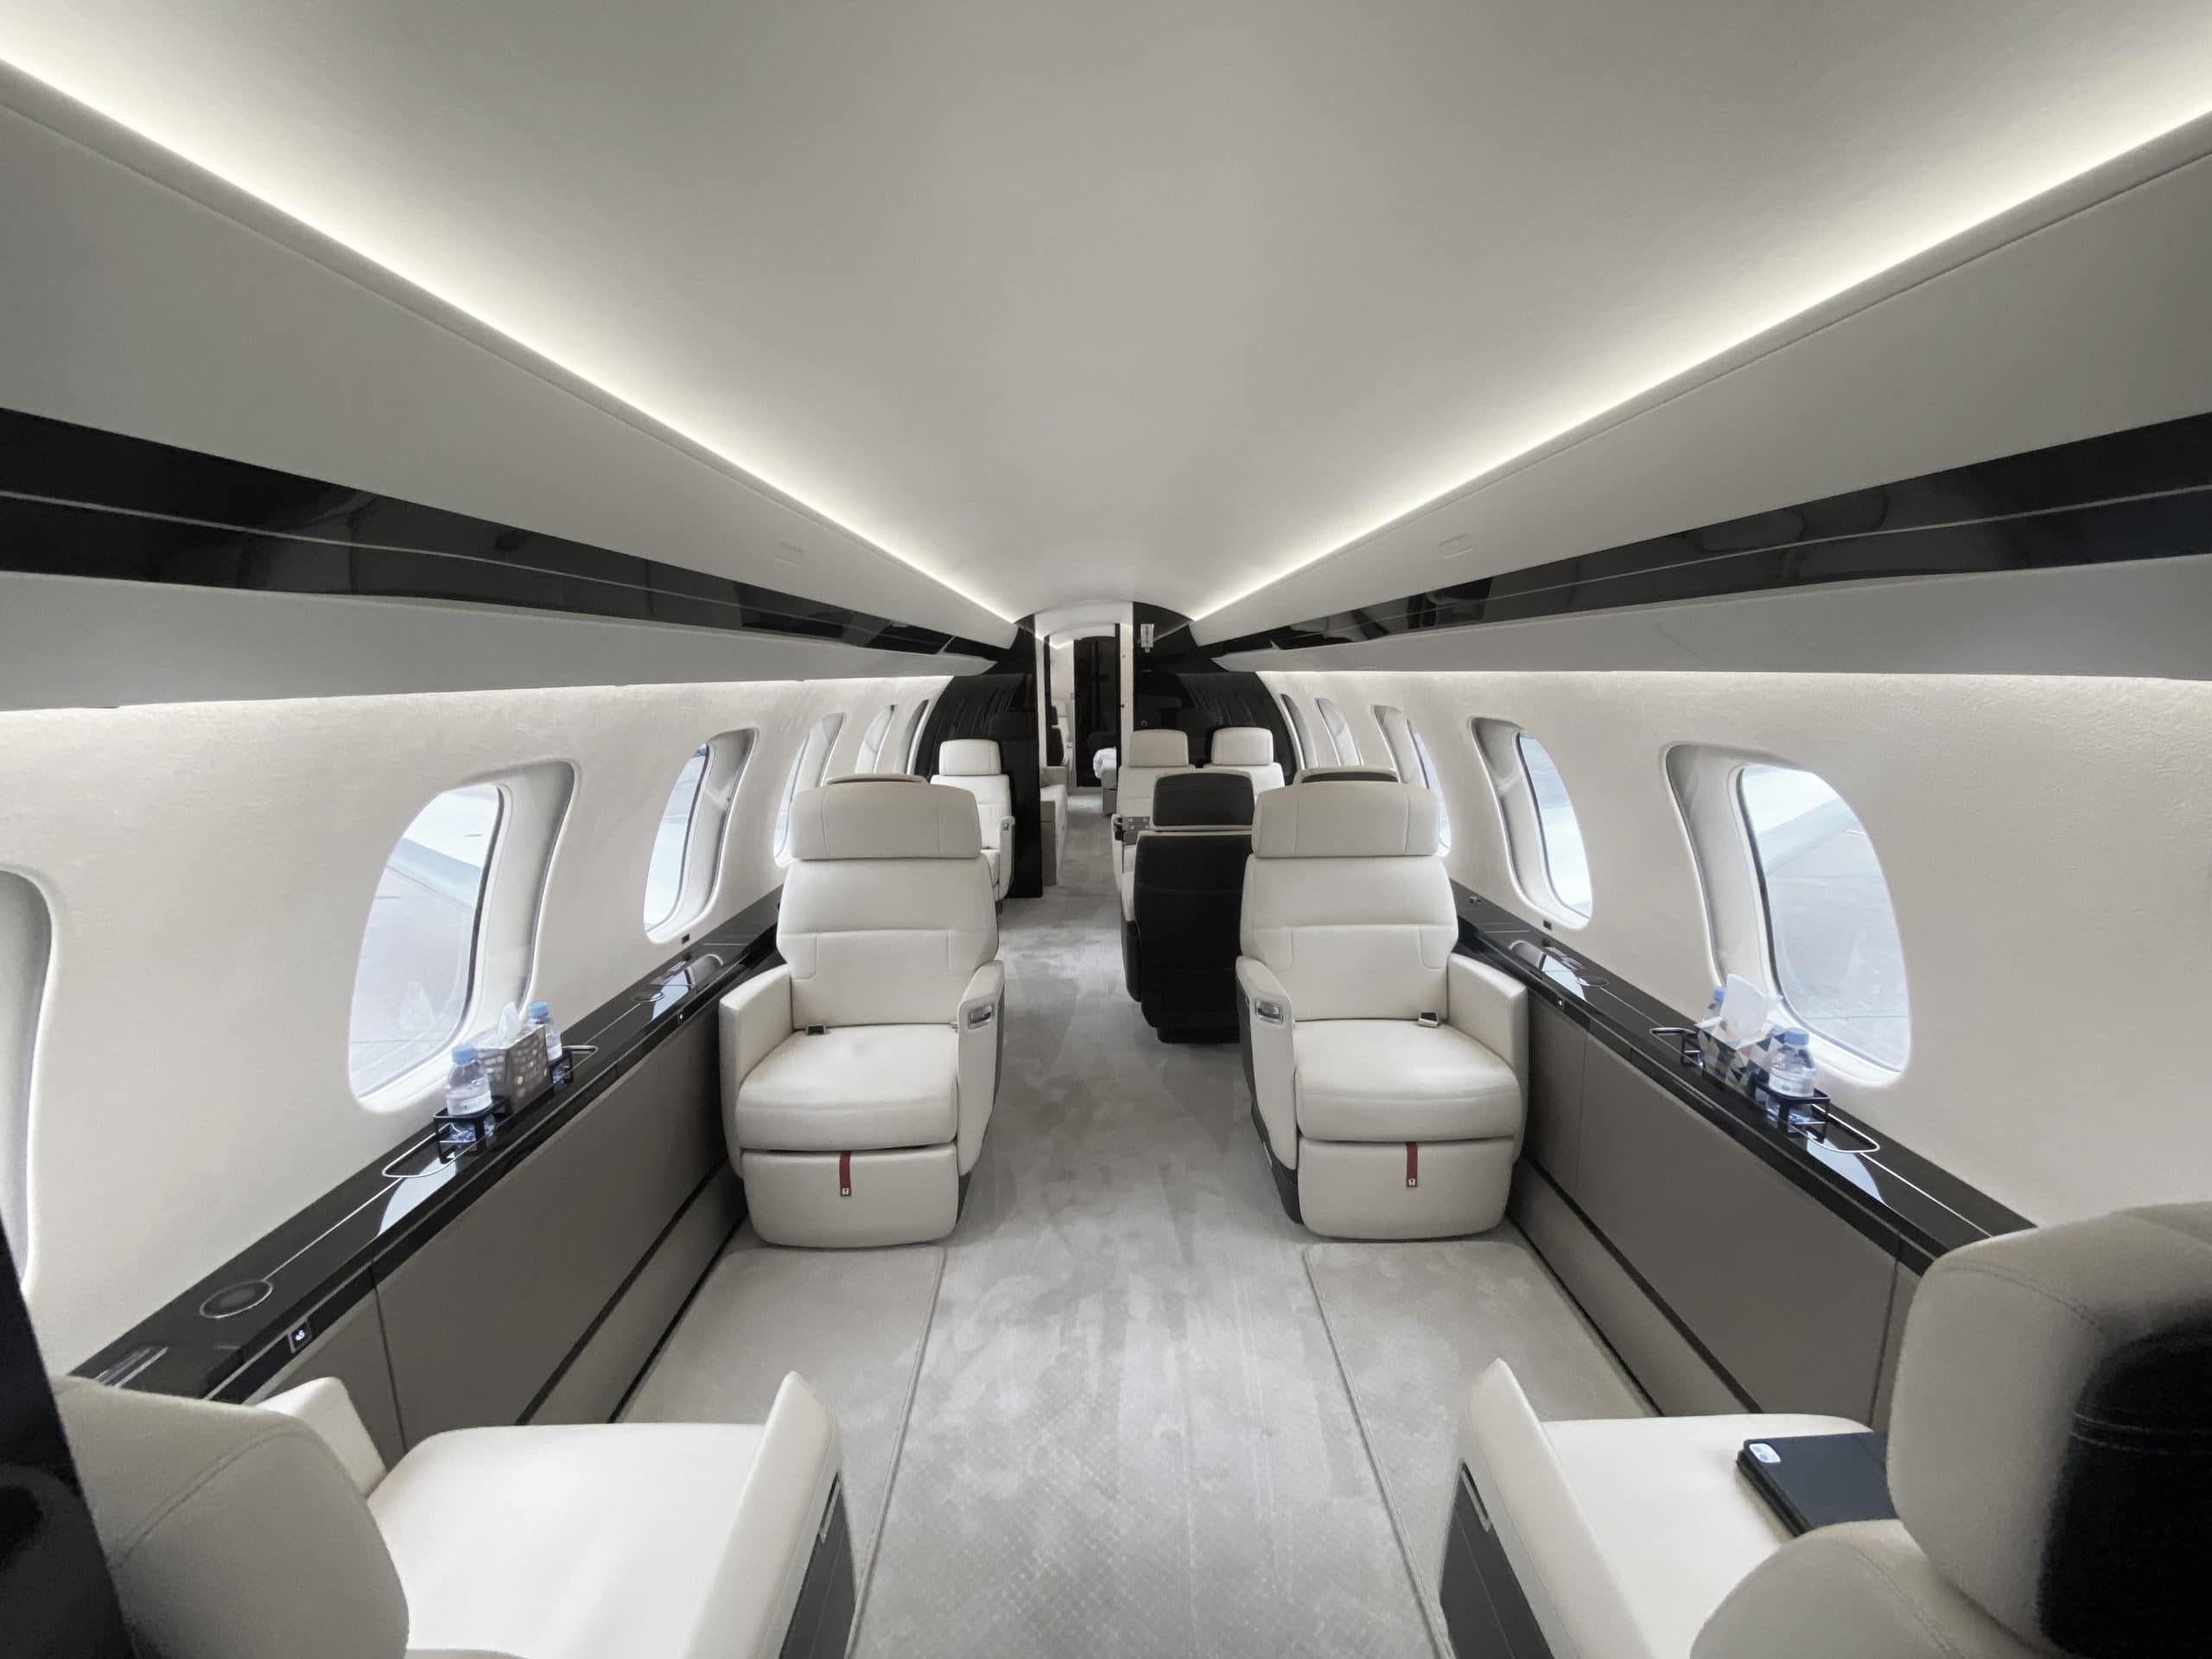 Luxaviation Group expands fleet with new Global 7500 and Legacy 650